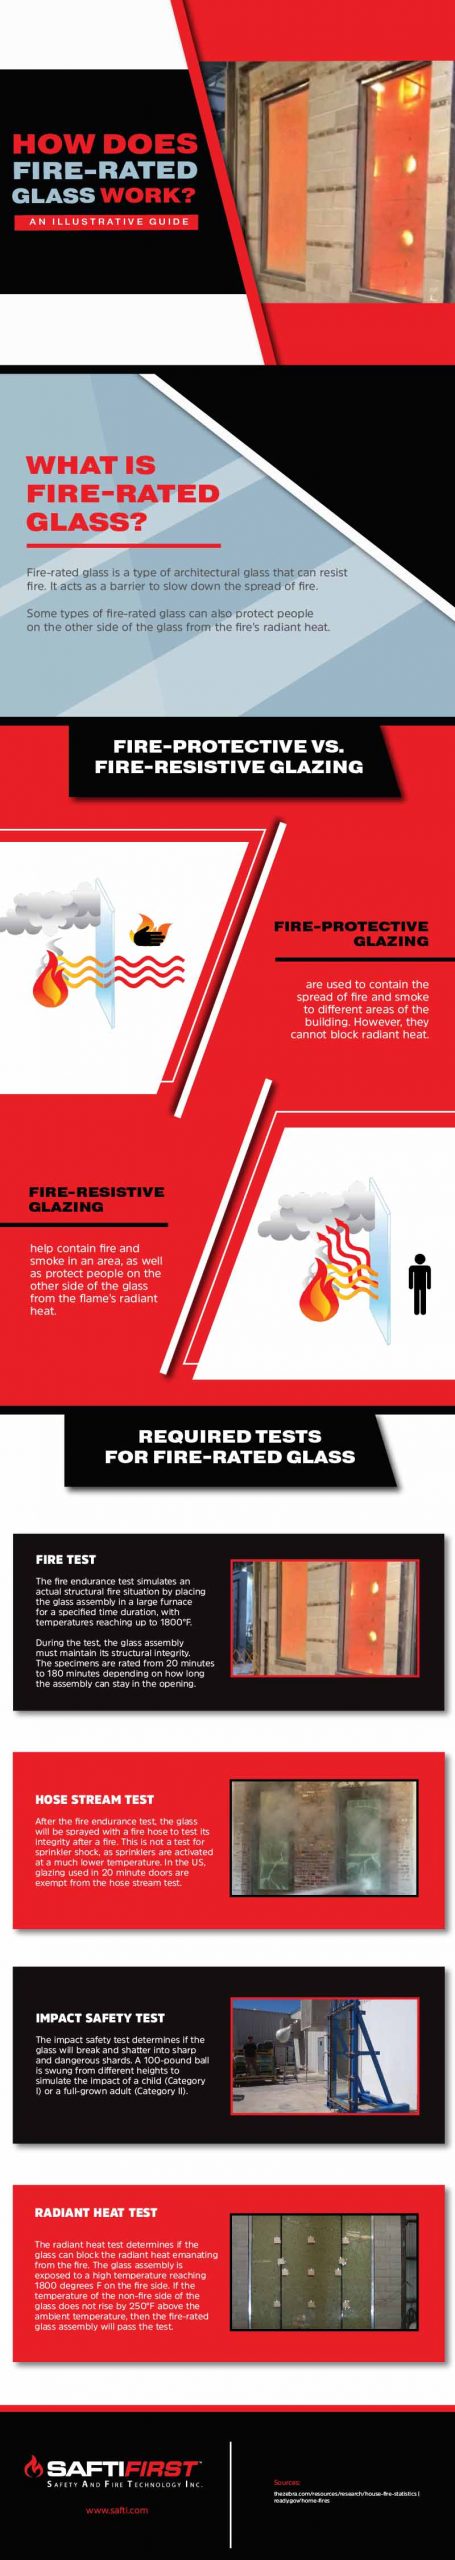 how does fire rated glass work infographic